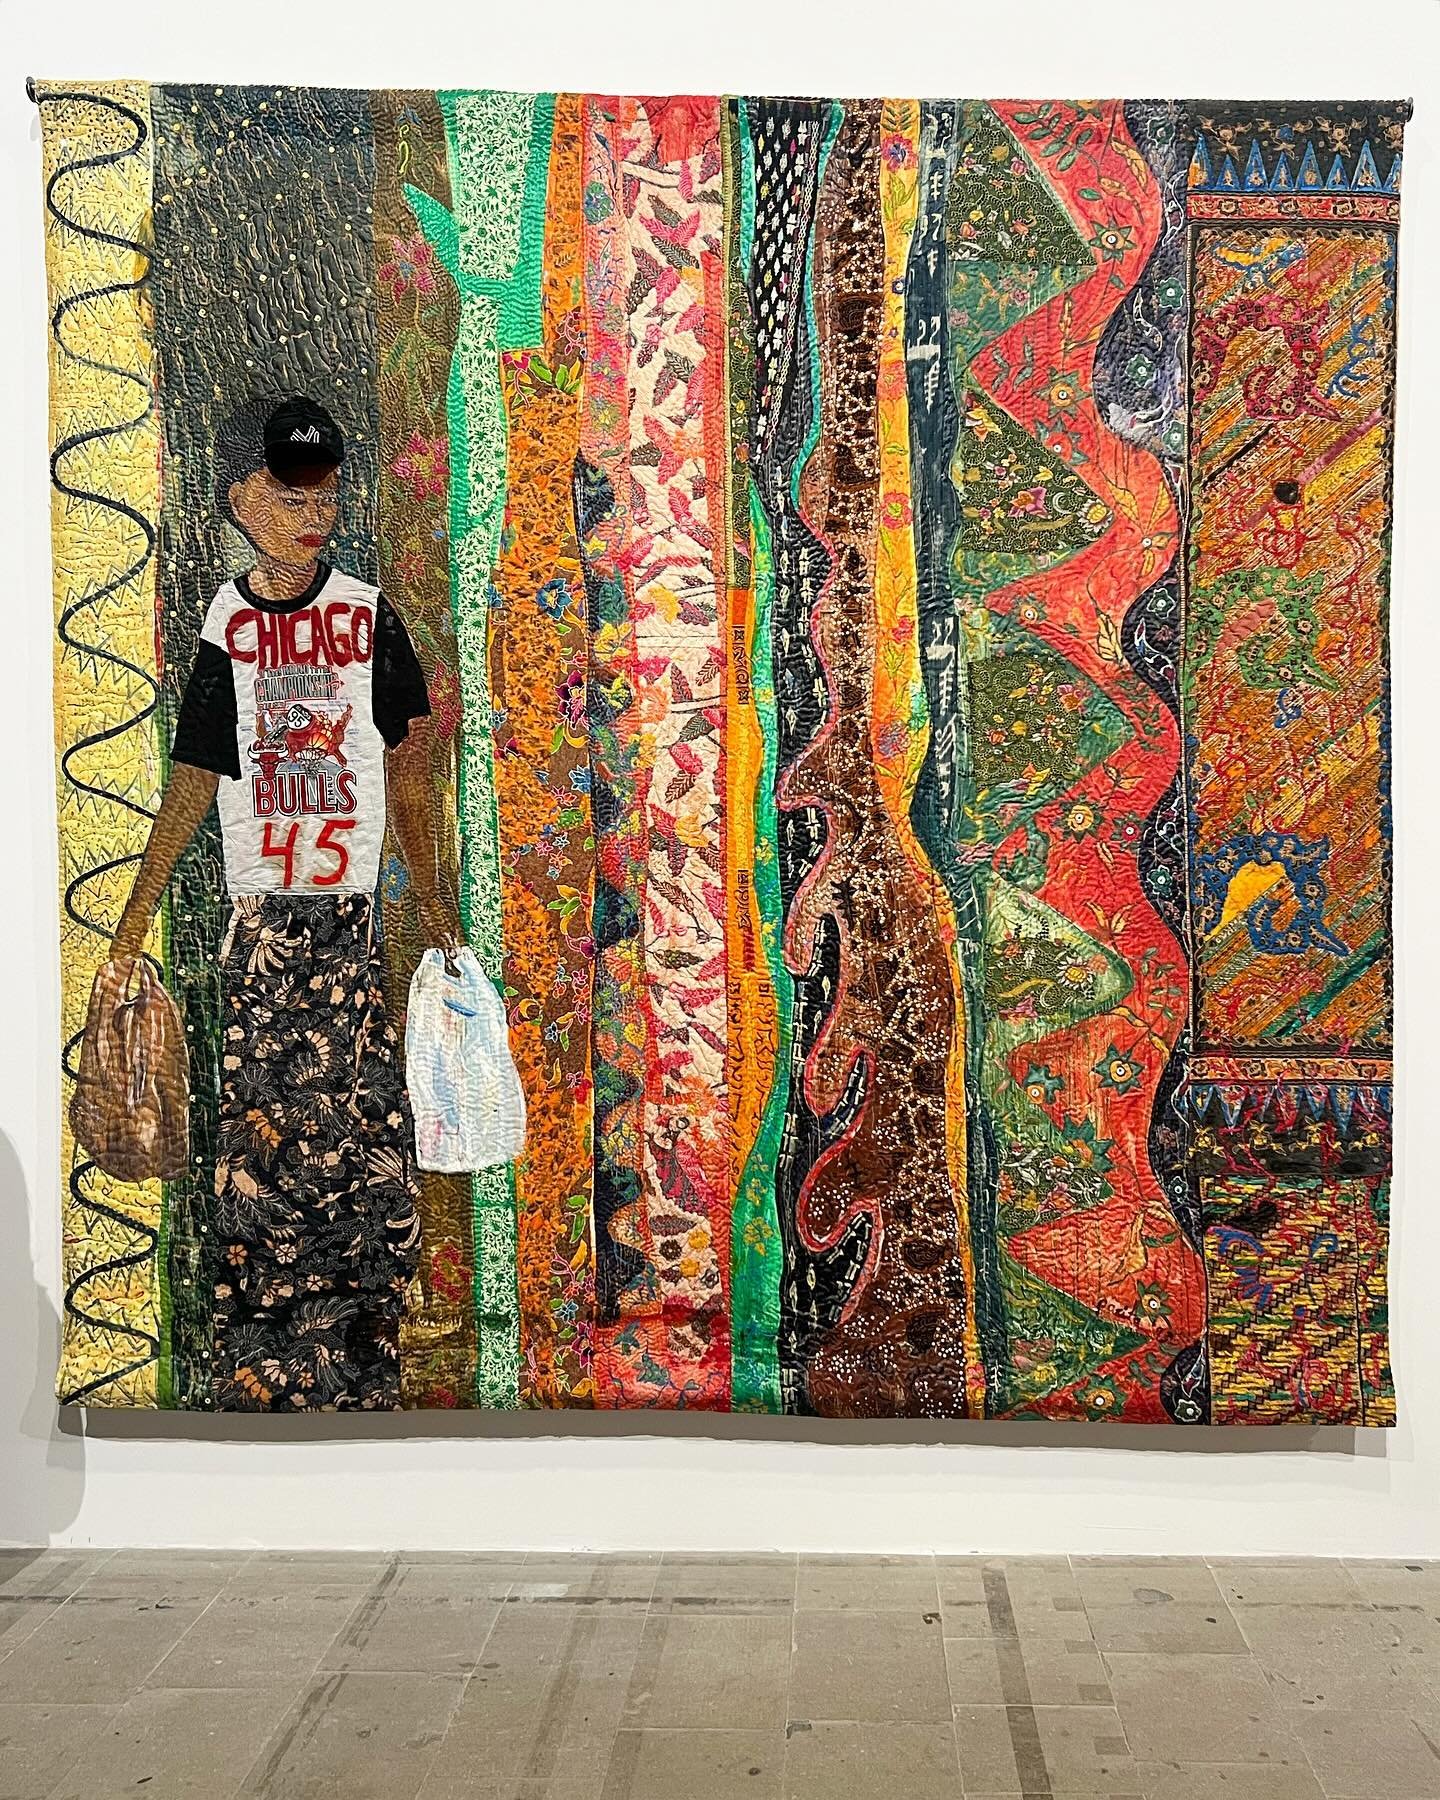 Meanwhile in @adrianopedrosa&rsquo;s Arsenale&rsquo;s curation @labiennale there were tons of textile works and a ton of paintings too.  Some known artists some completely new to me. These were my faves:

1) Pacita Abad (Philippine-American)
2) Borda